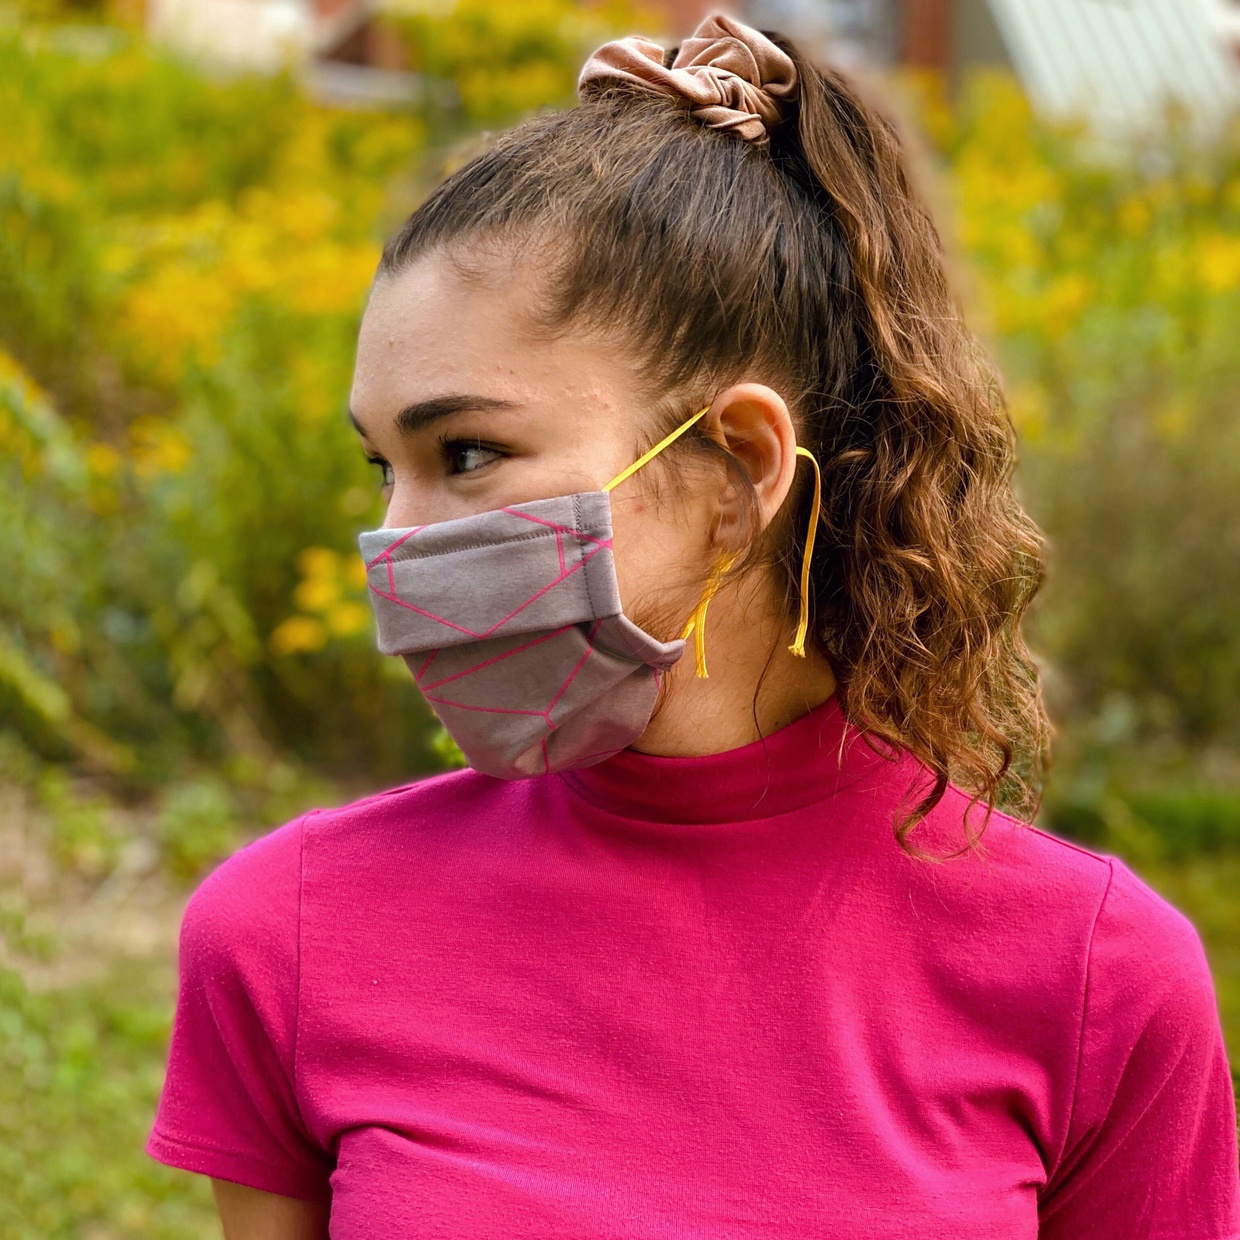 A tanned, young woman with dark hair wears a bright pink shirt and a colorful mask.